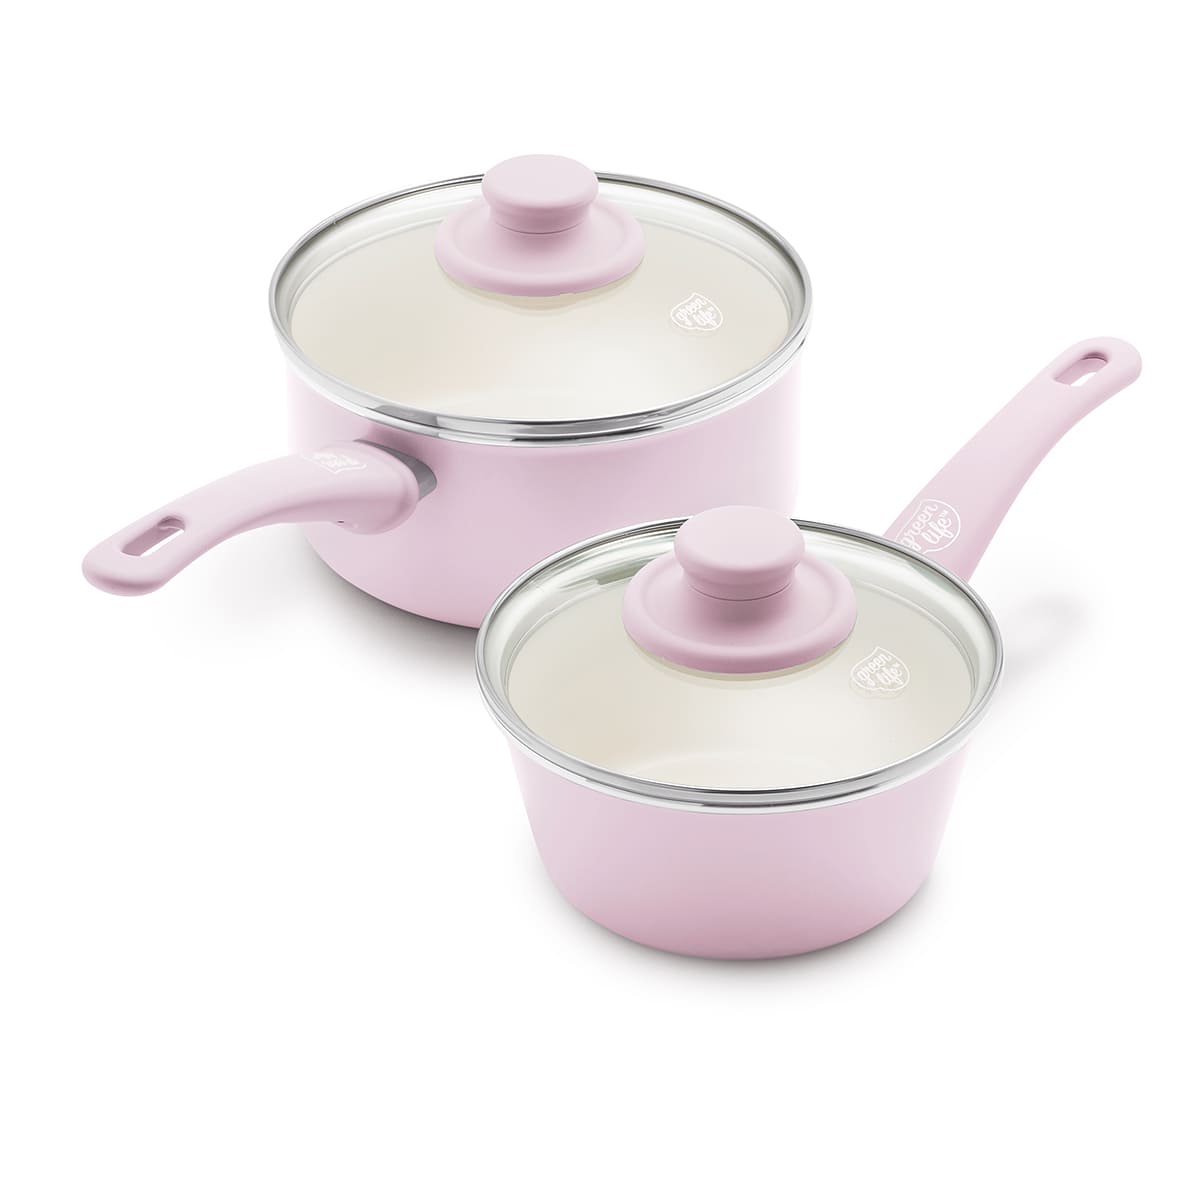 GREENLIFE SOFT GRIP <br> 4PC COOKWARE SETS, PINK